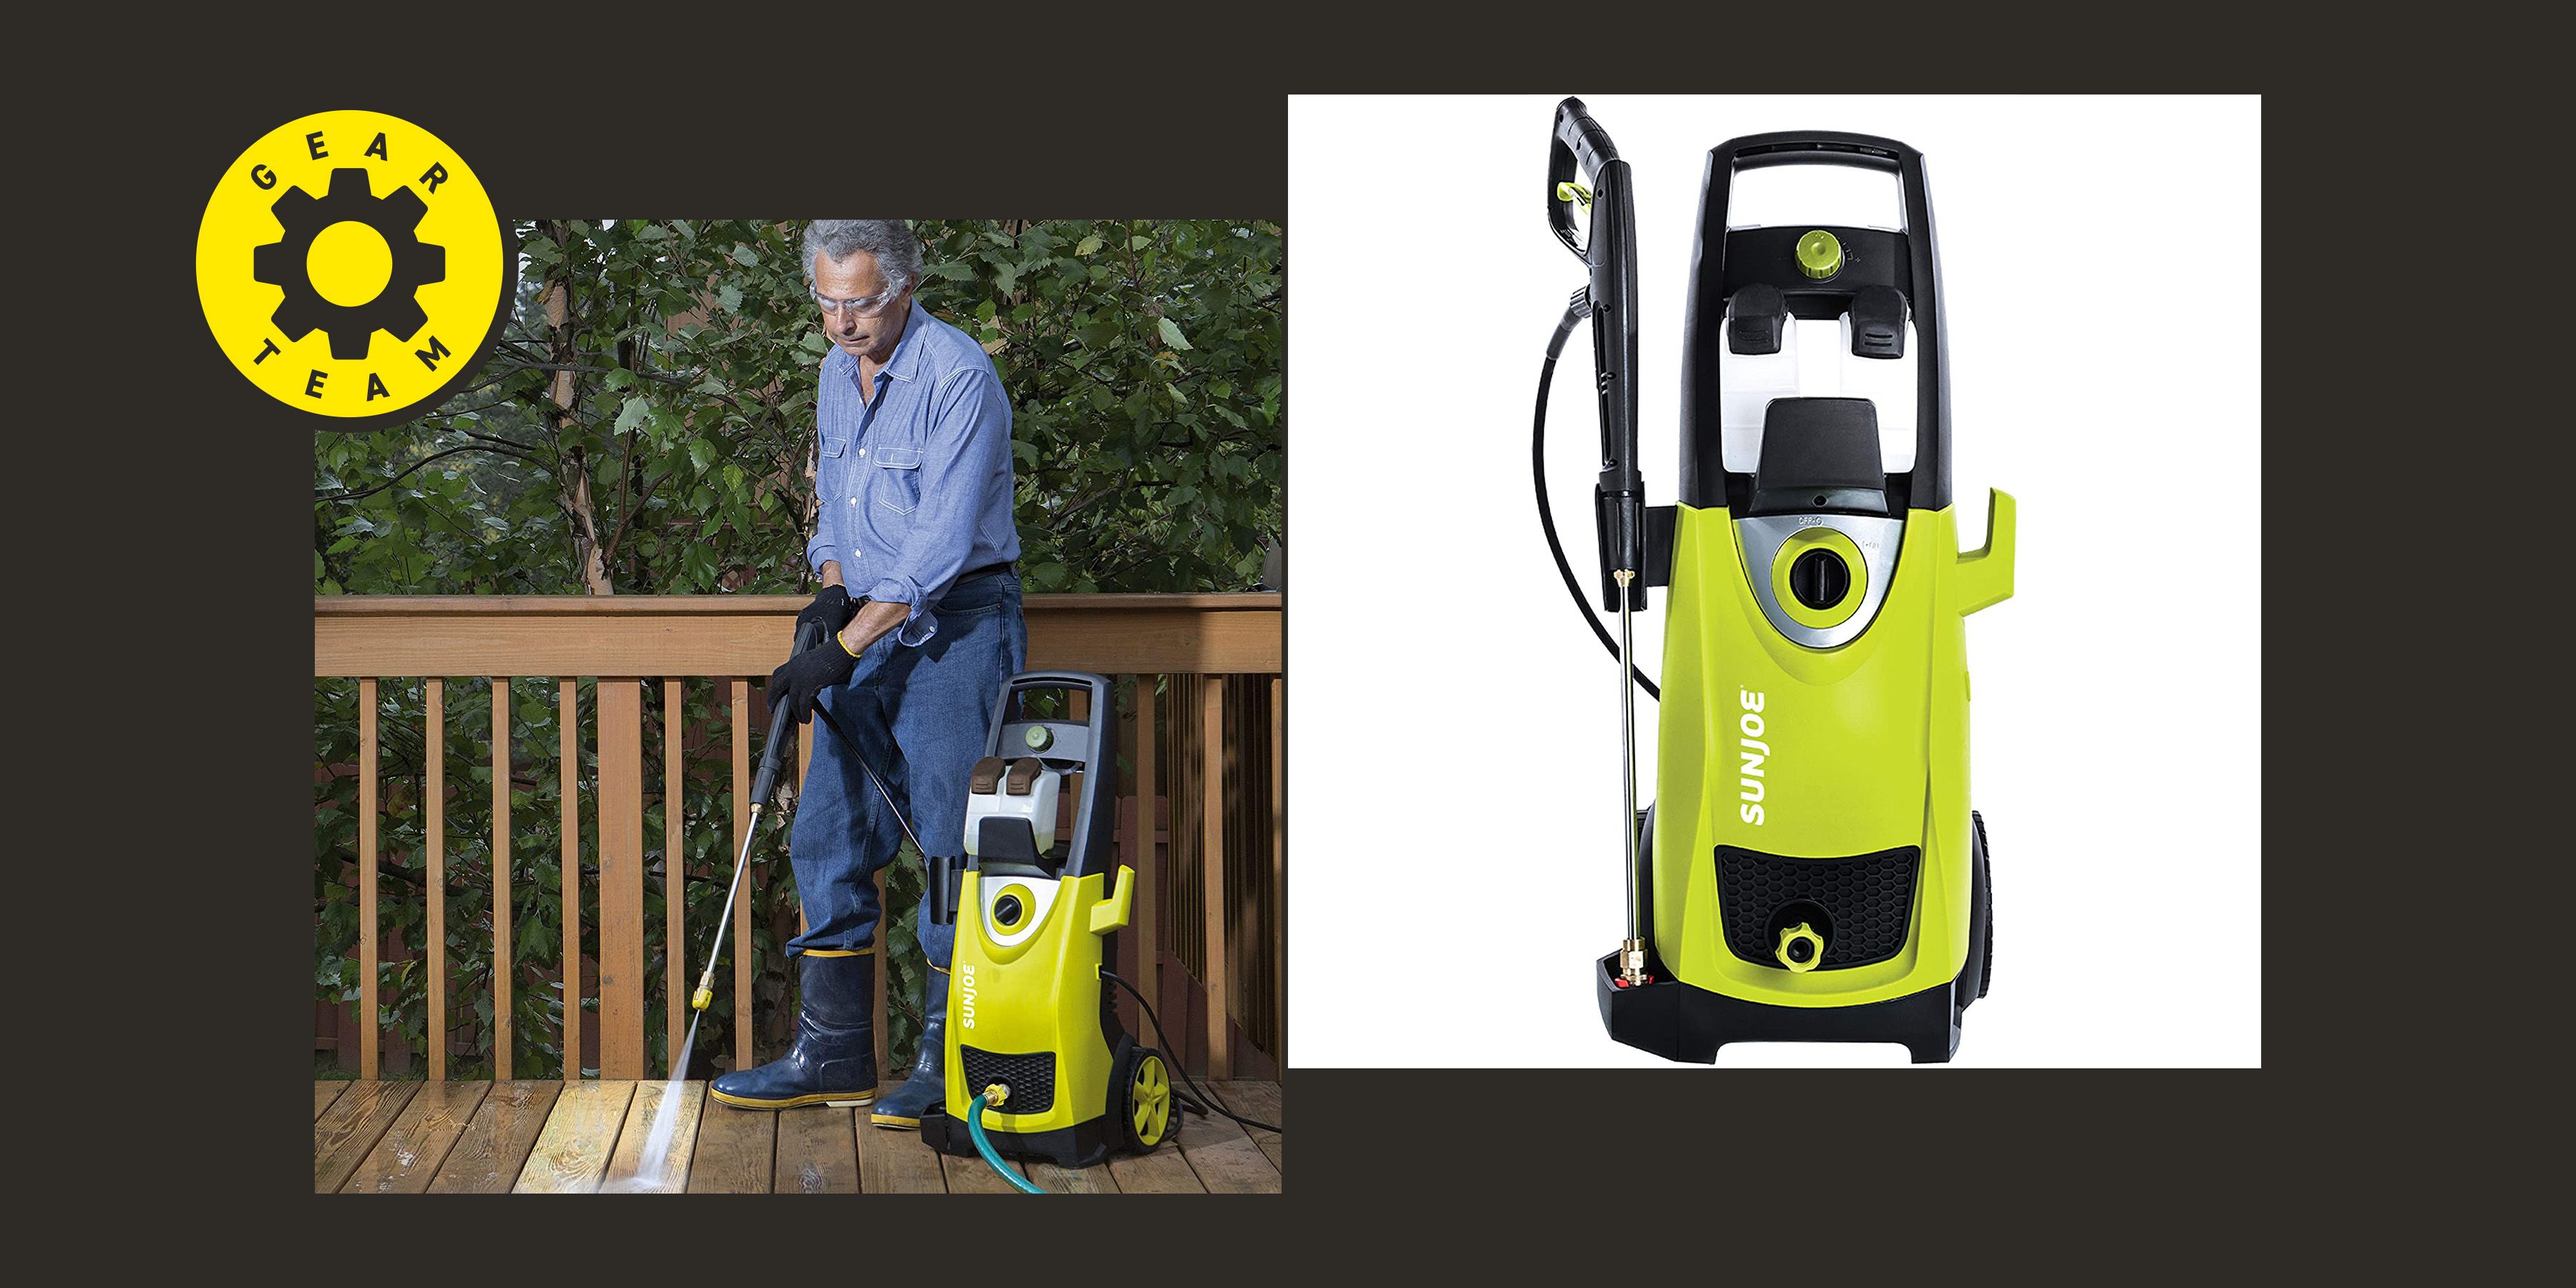 Deal Alert: Save Big on This Top-Rated Electric Pressure Washer